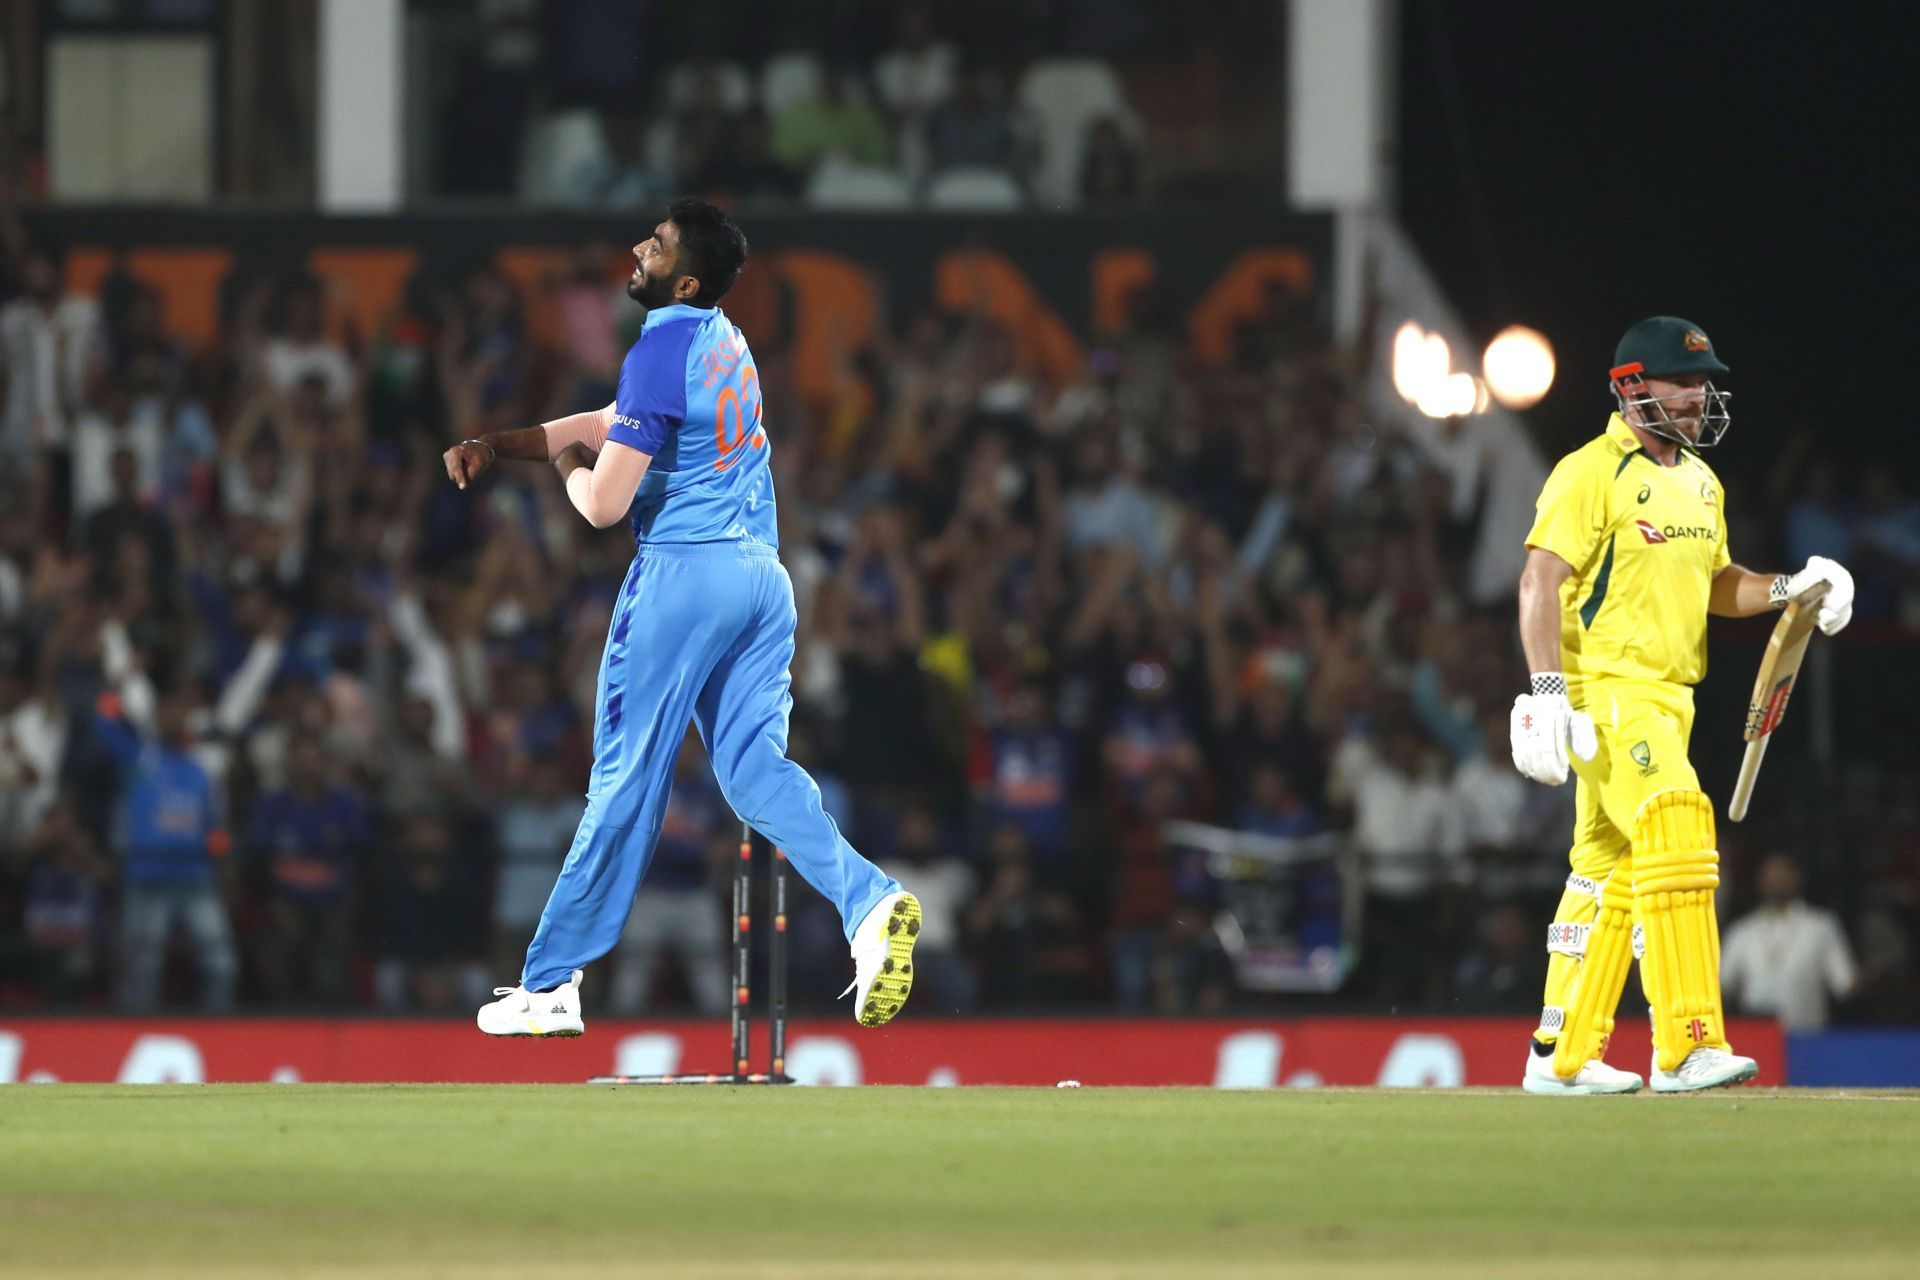 Jasprit played for India in the recently-concluded T20I series against Australia (Image: Getty)